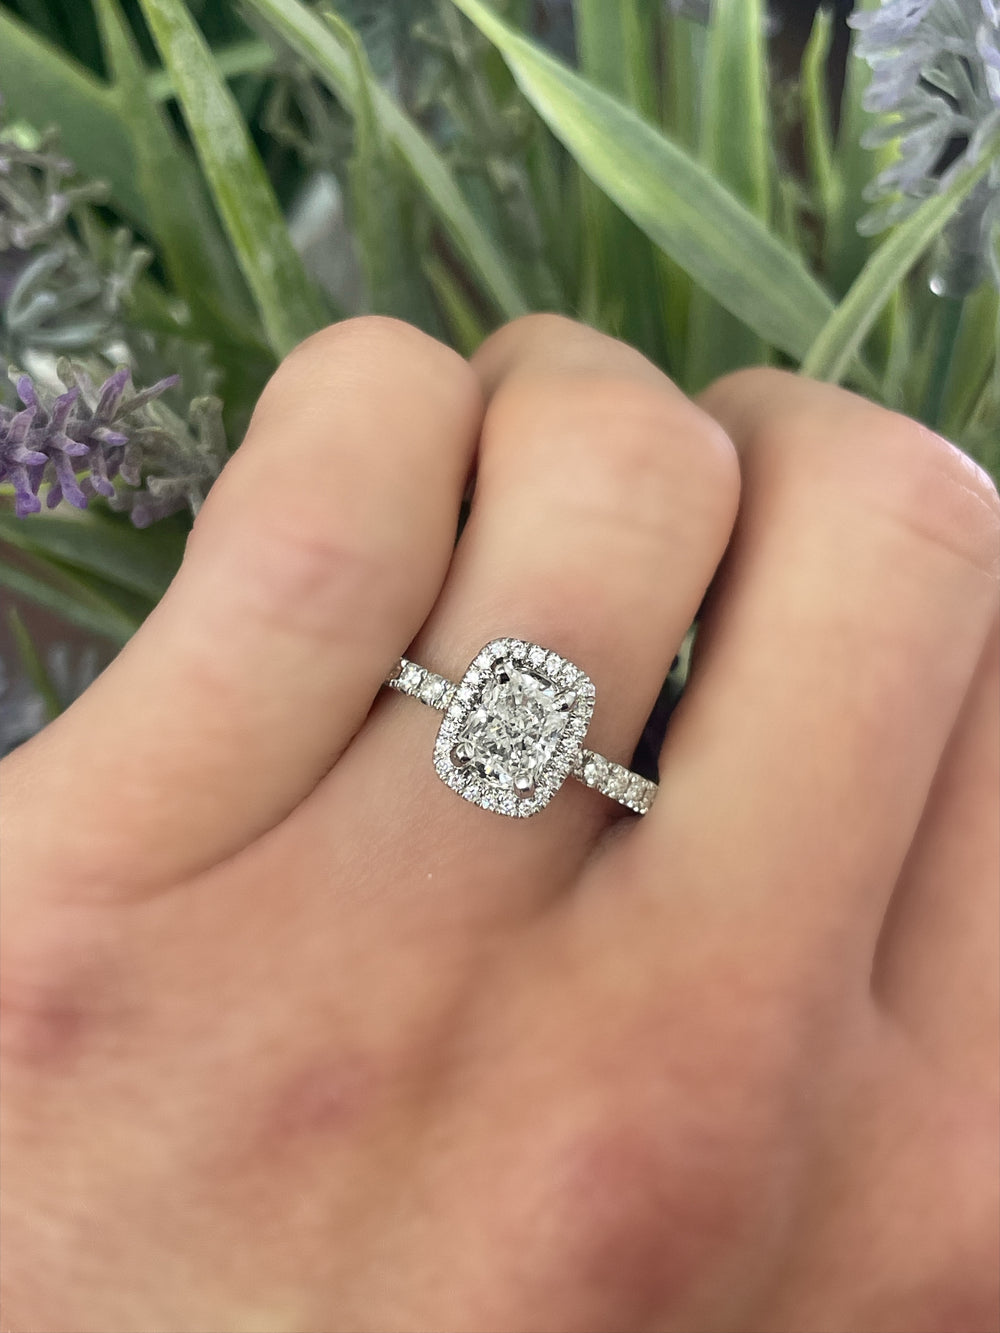 Radiant-Cut Diamond with Halo 14k White Gold Engagement Ring on hand